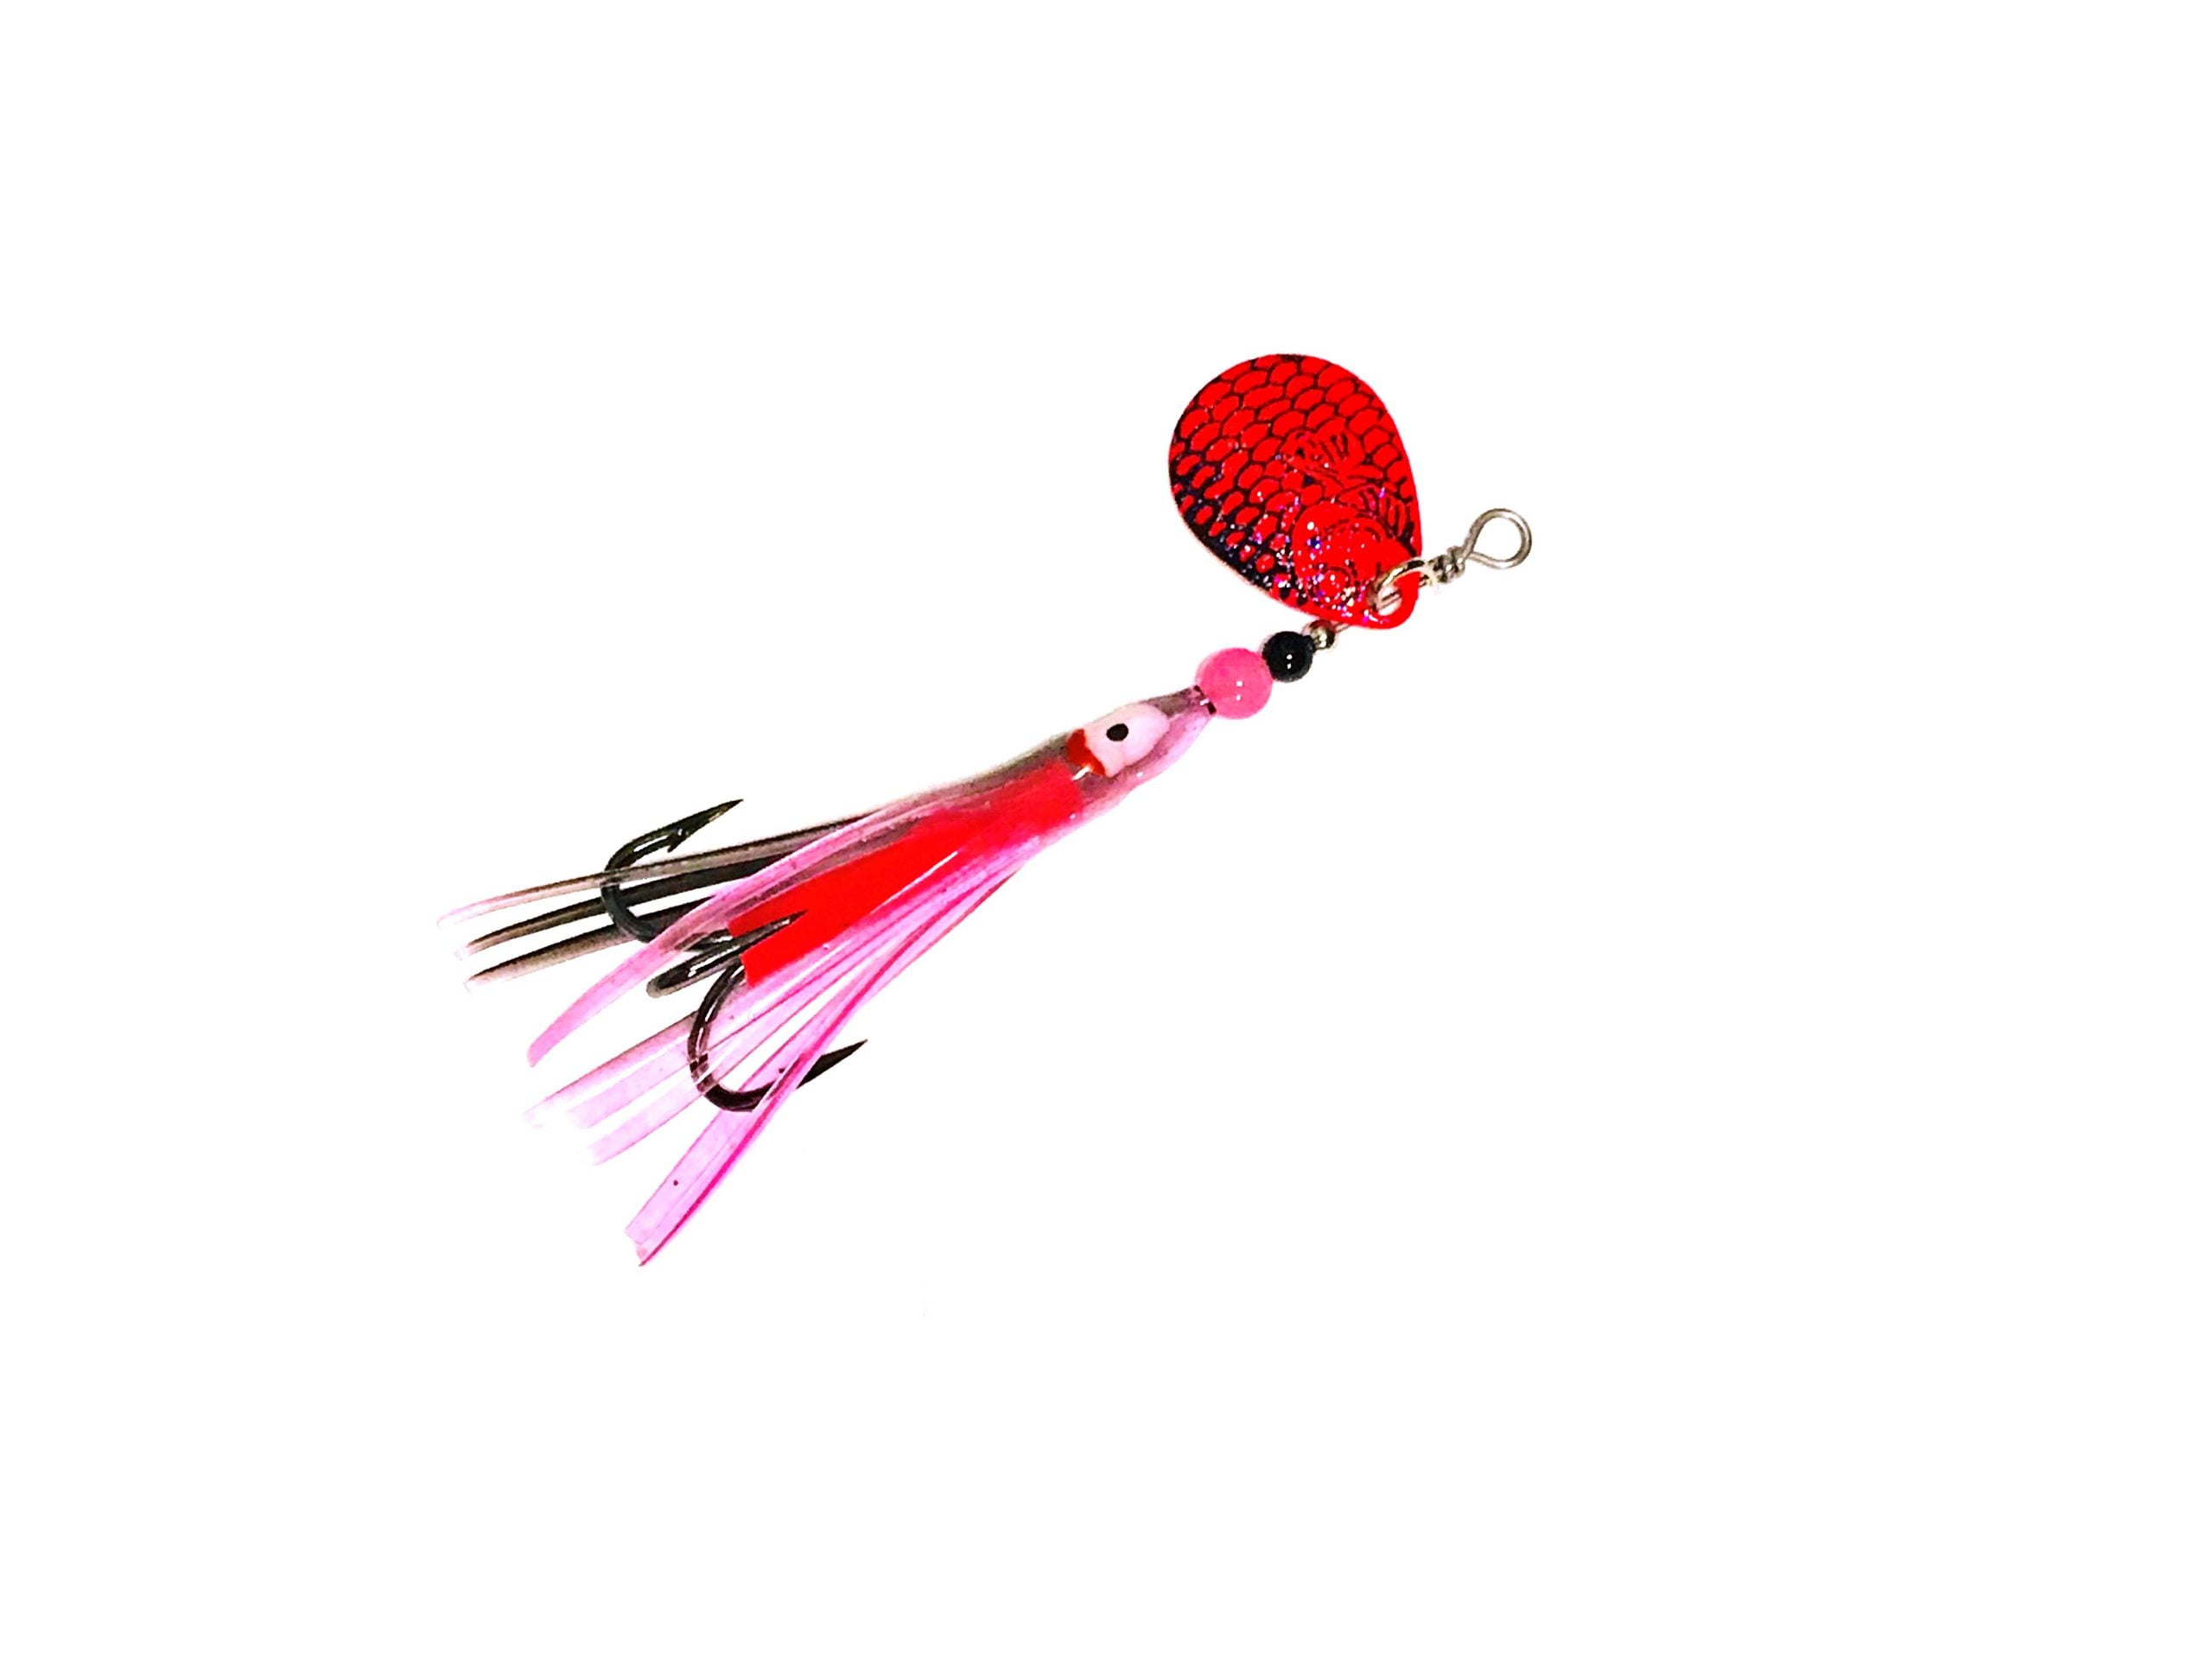 Dirty Troll Full Scale Assault #3.5 Colorado Pink Nightmare” Hoochie  Salmon Trolling Spinners - Dirty Troll Salmon Trolling Spinners